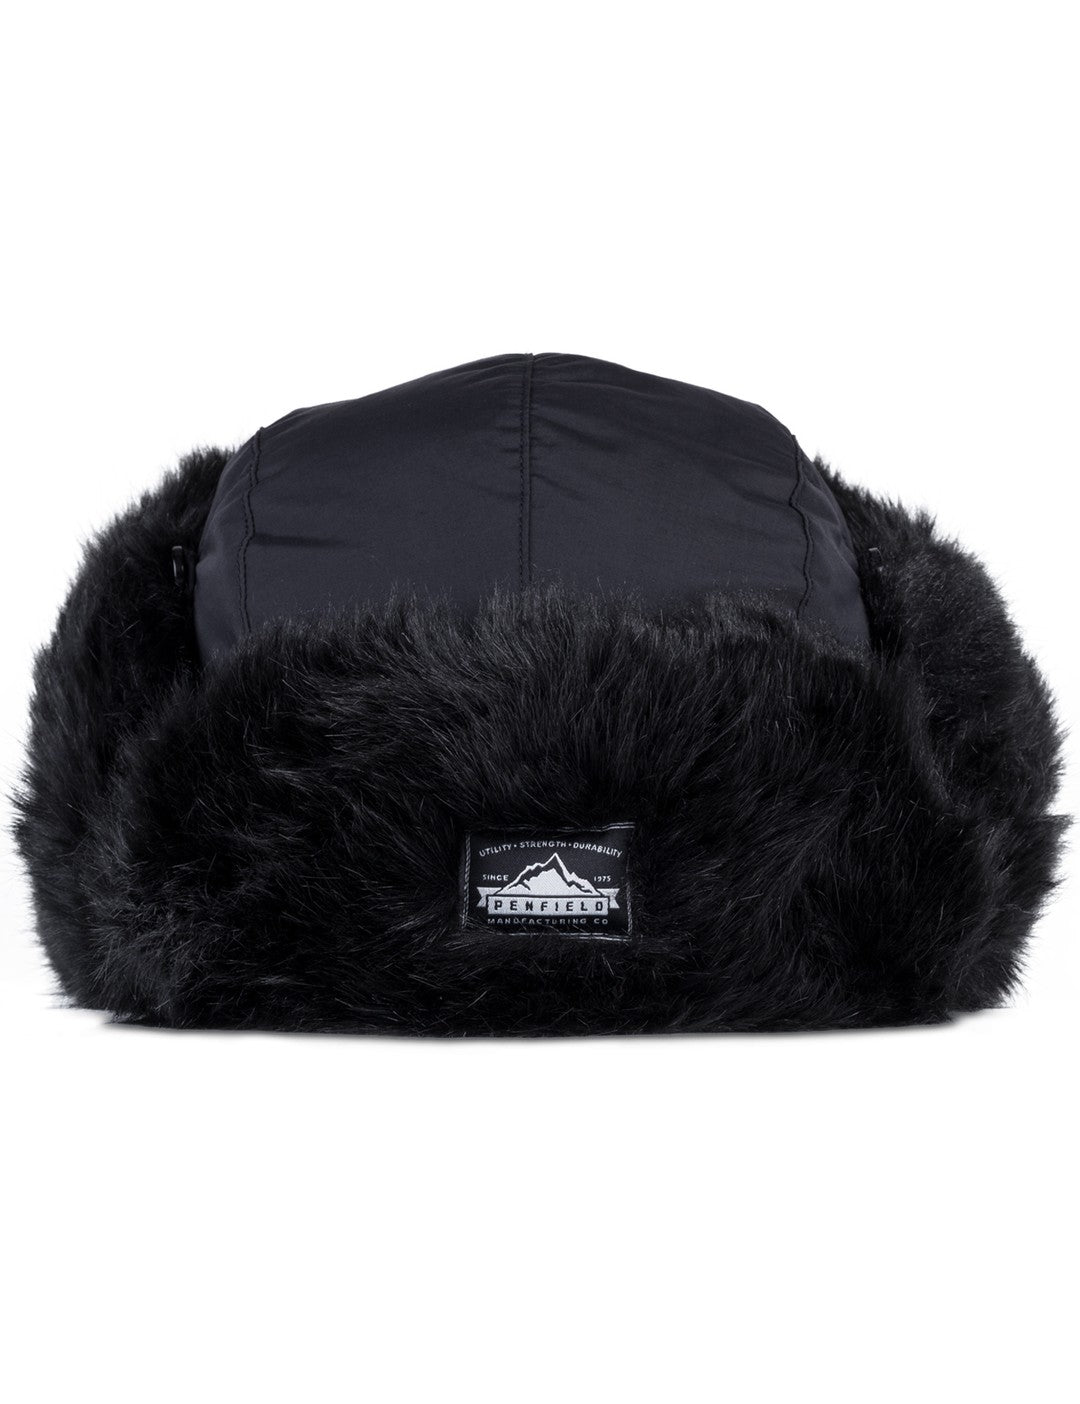 Penfield Black Providence Trapper Hat $65 NEW – Walk Into Fashion